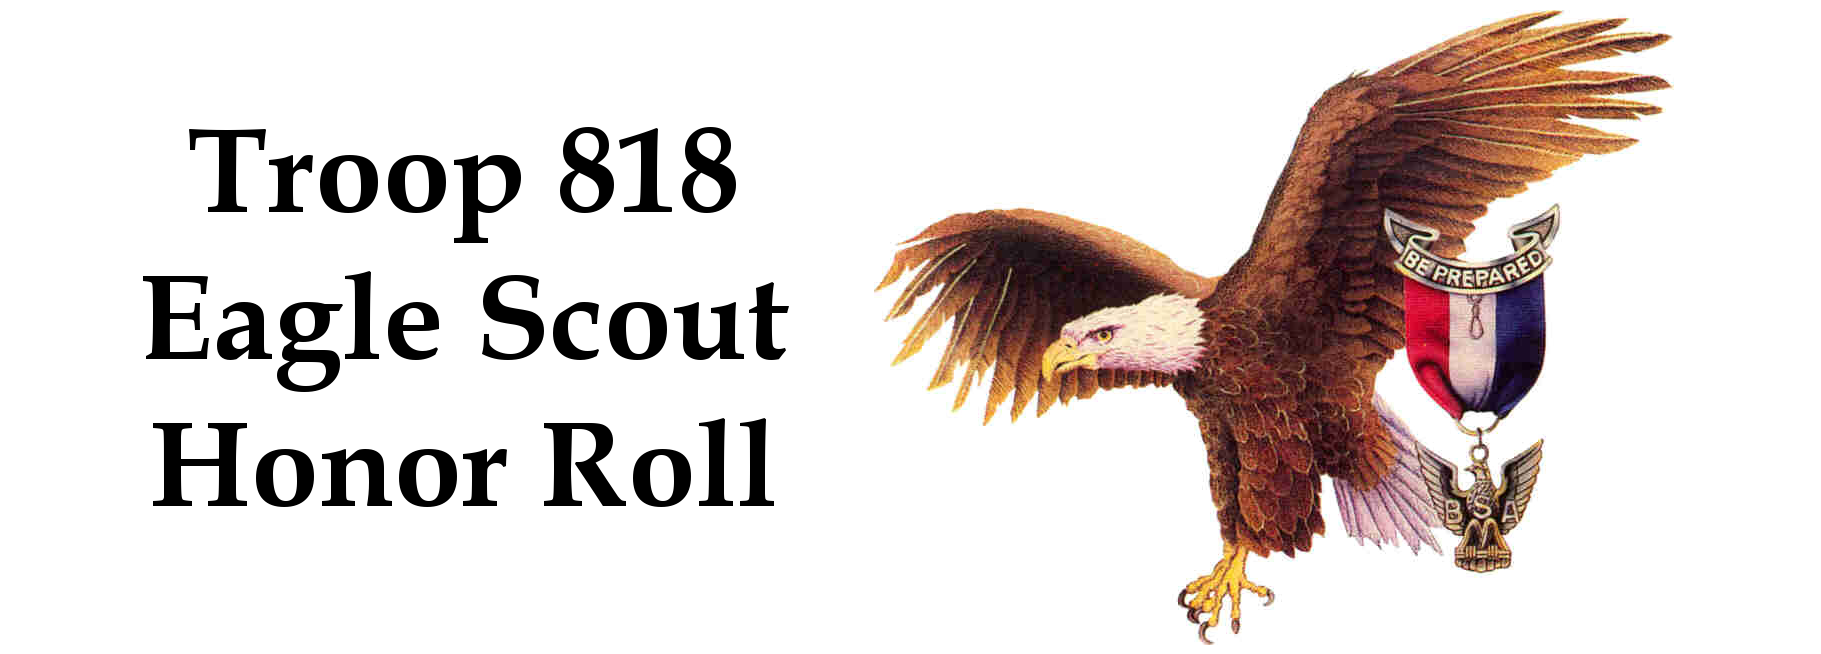 Troop 818 Eagle Scout Honor Roll